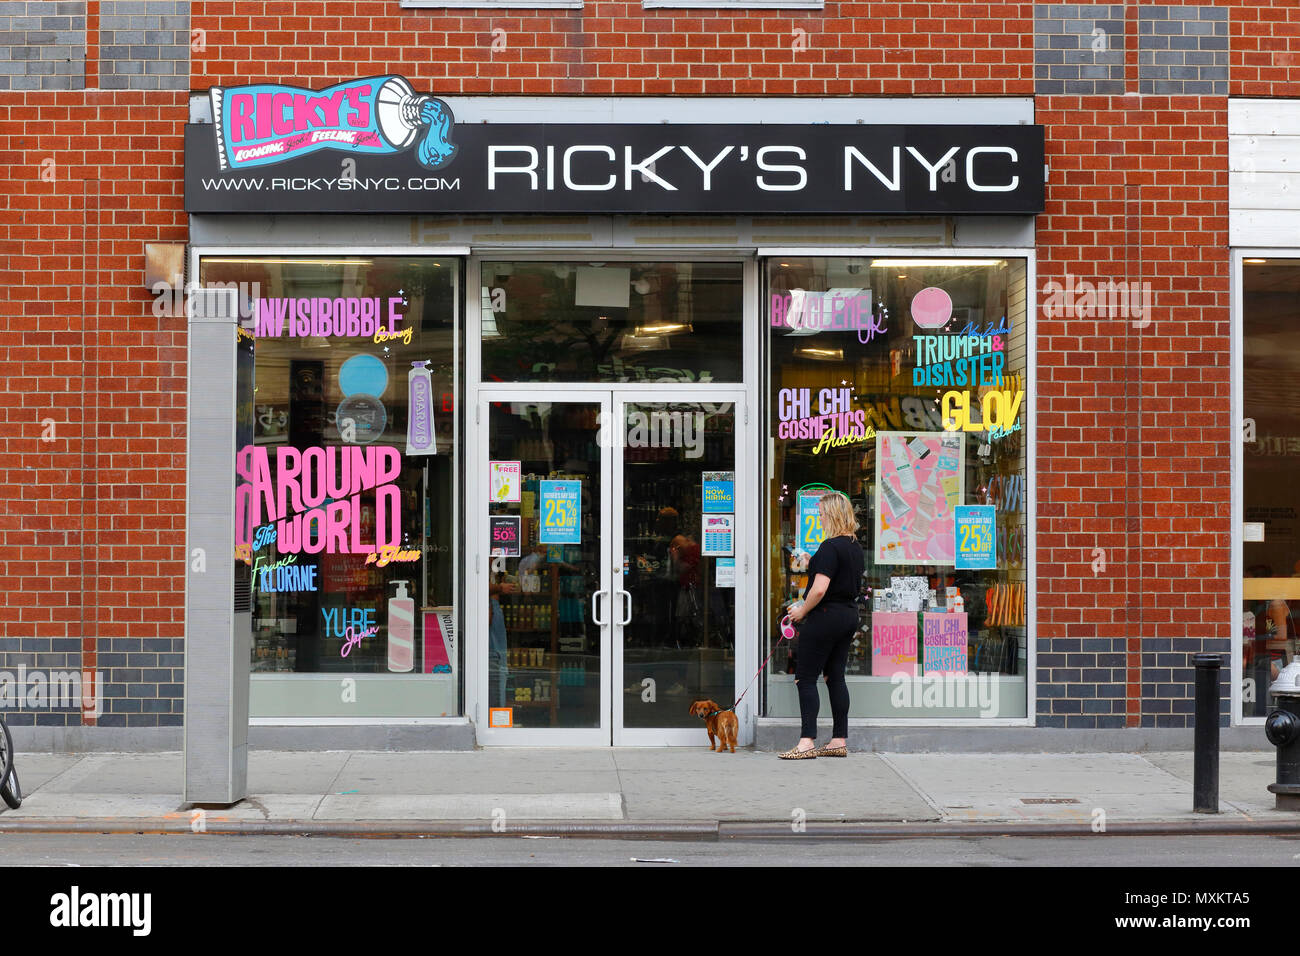 [historical storefront] Ricky's NYC, 142 8th Ave, New York, NY. exterior storefront of a cosmetics store in Manhattan's Chelsea neighborhood. Stock Photo